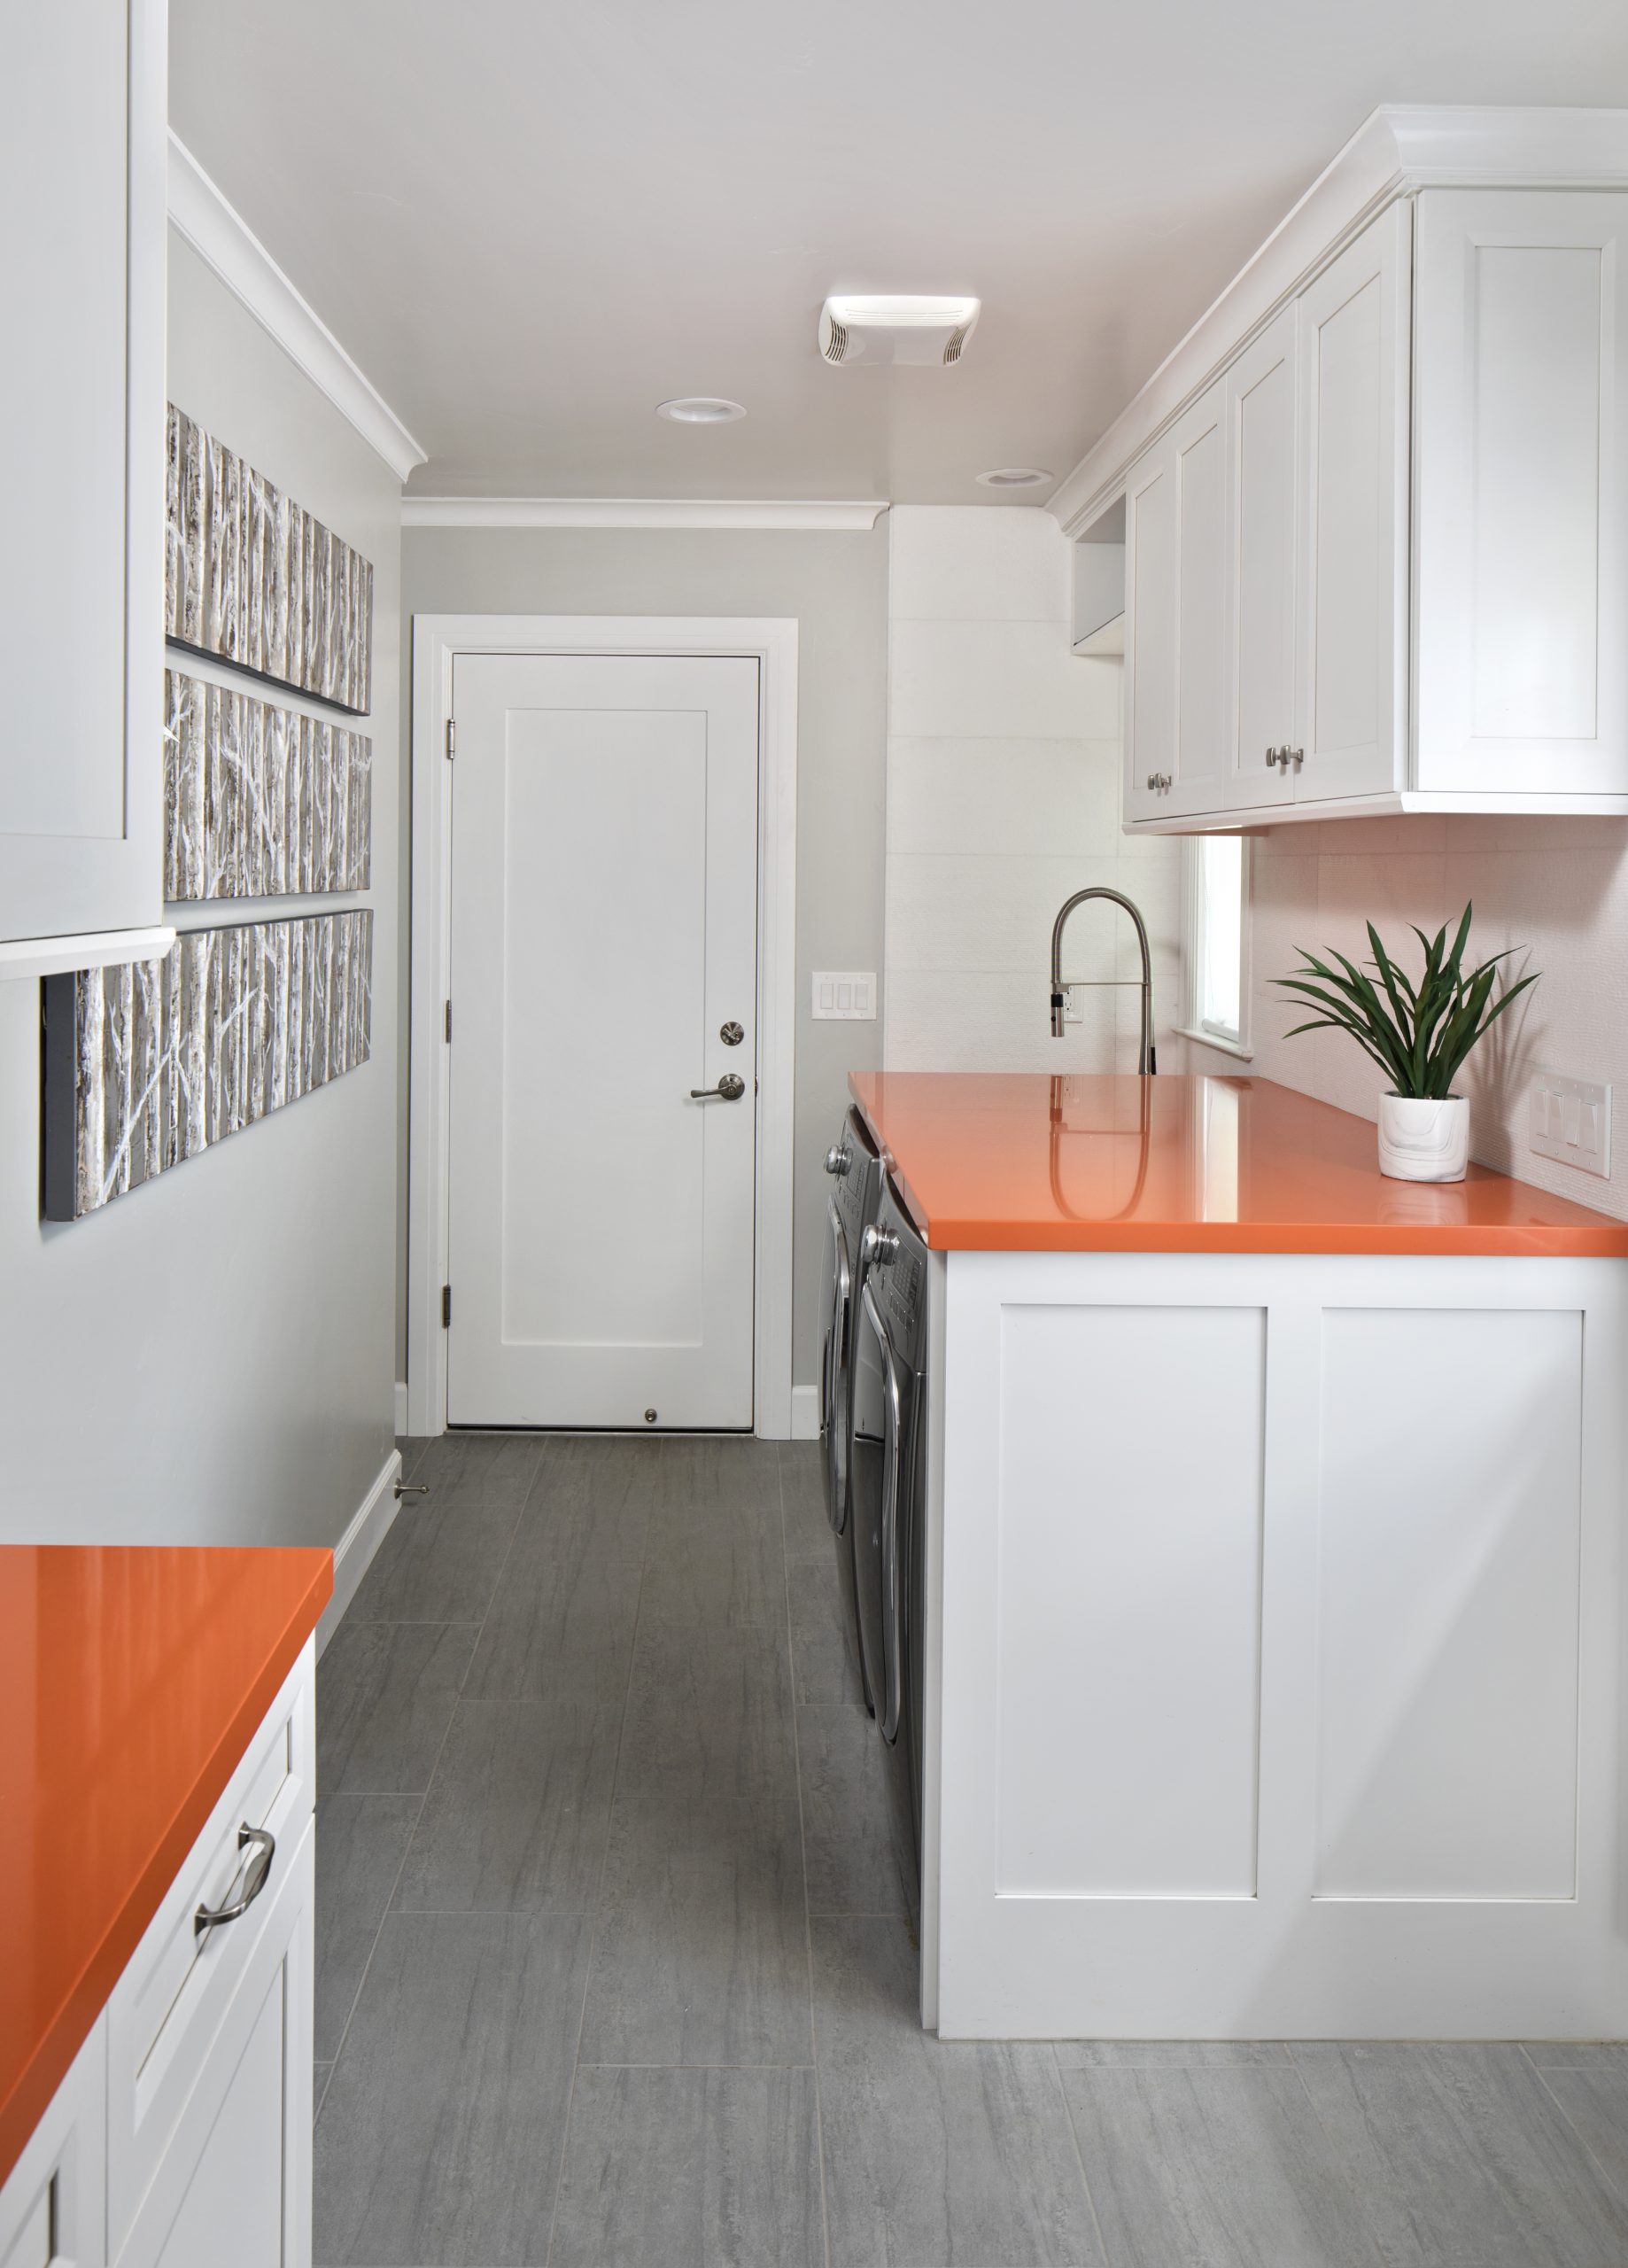 A laundry room with orange counter tops and modern appliances.